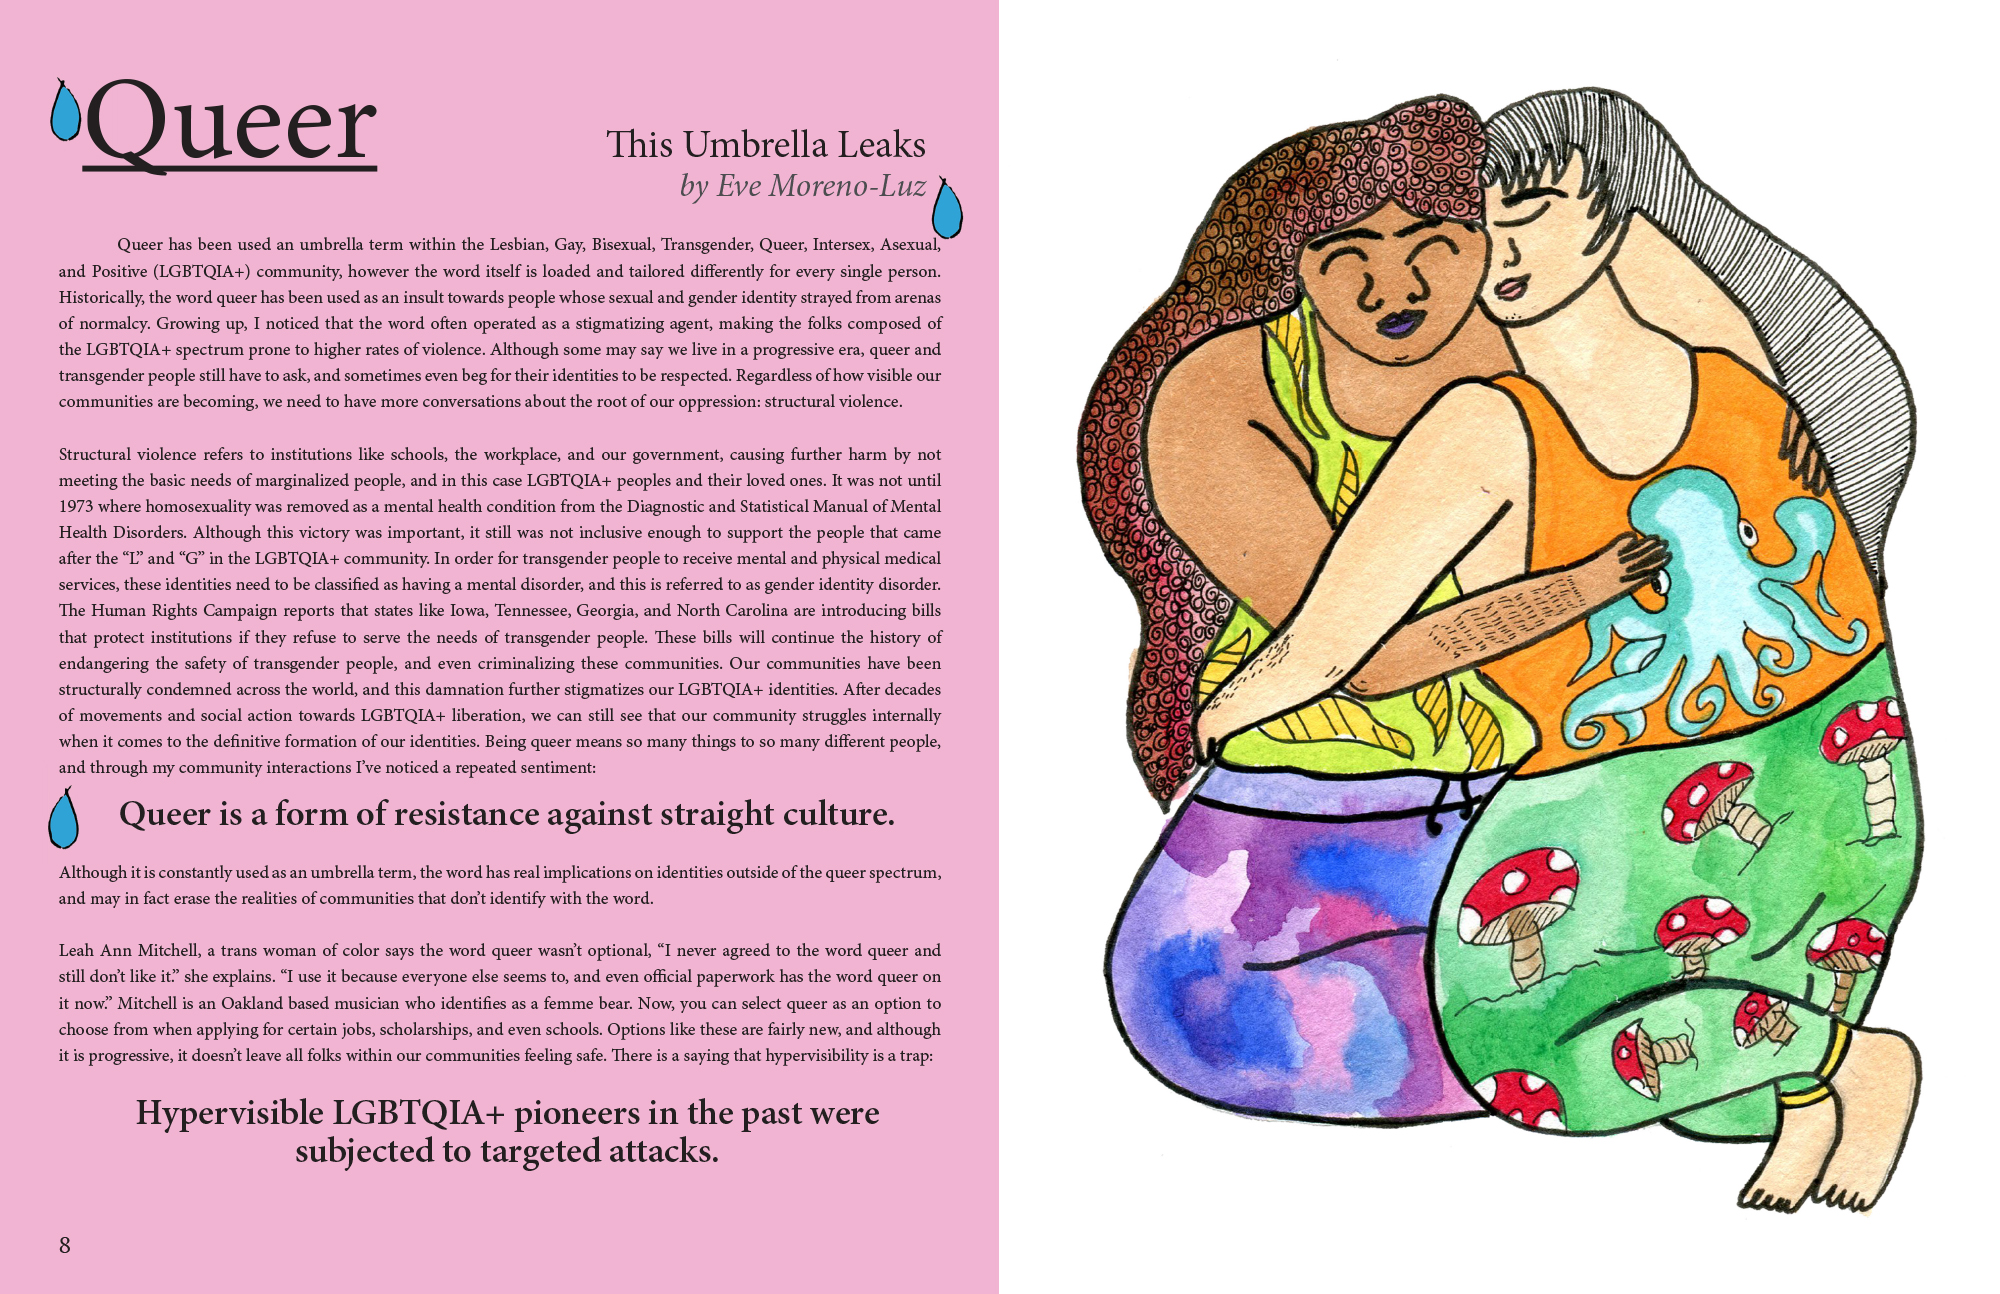 NoRM article "Queer: This Umbrella Leaks" by Eve Xelestiál Moreno-Luz, and the page is designed by me, Bryan Ortega, with drawing "This Love is Home" by Whitney Kitty